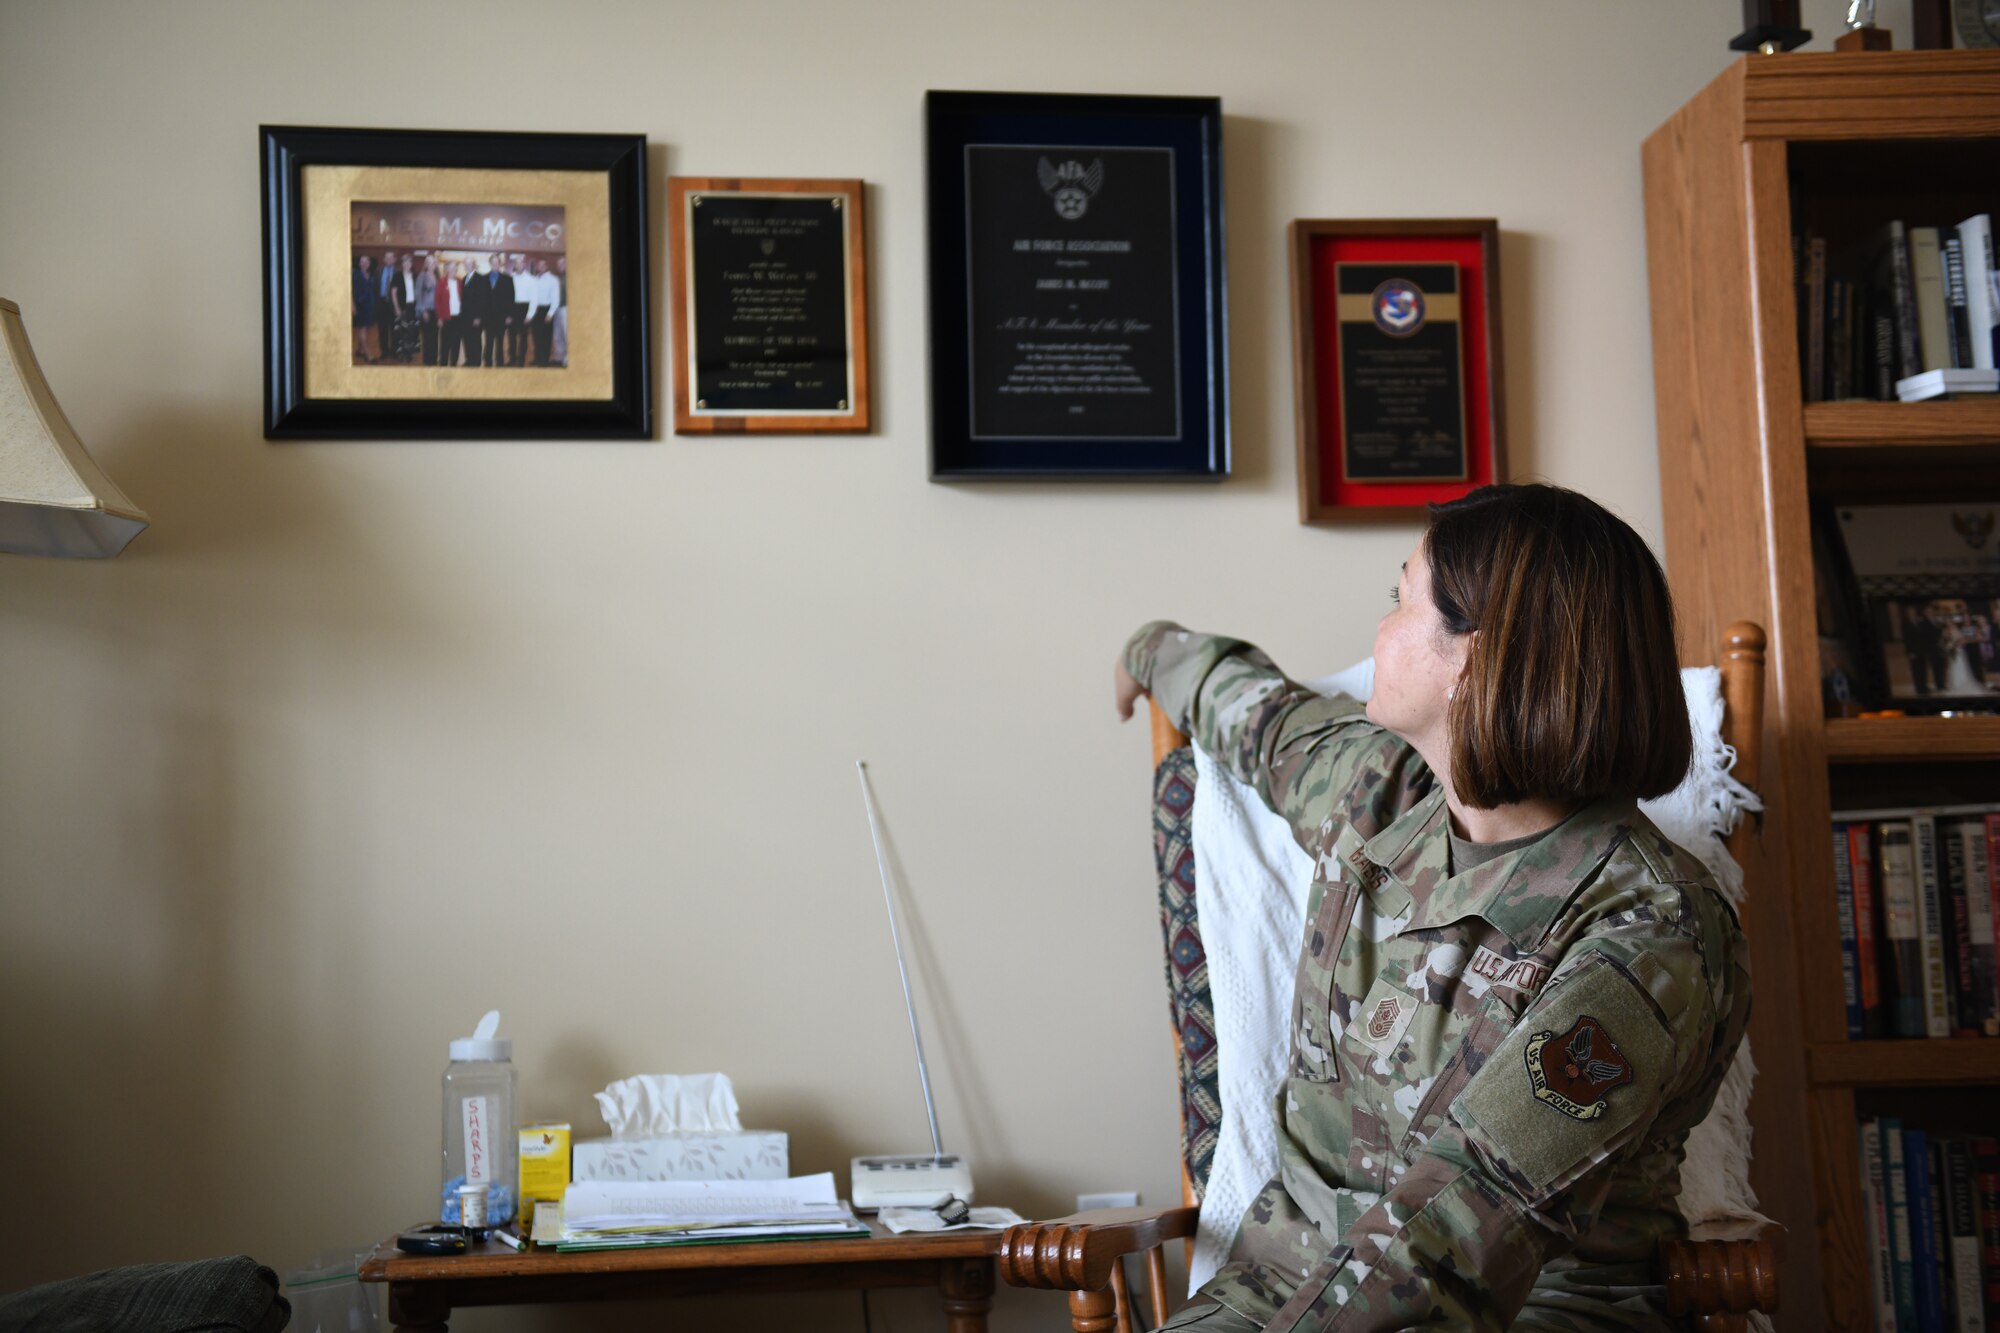 Chief Master Sergeant of the Air Force JoAnne S. Bass sits in a chair with her arm on the back rest turned over her right shoulder looking at the wall behind her. The wall behind her has four frames, one photo and three awards.